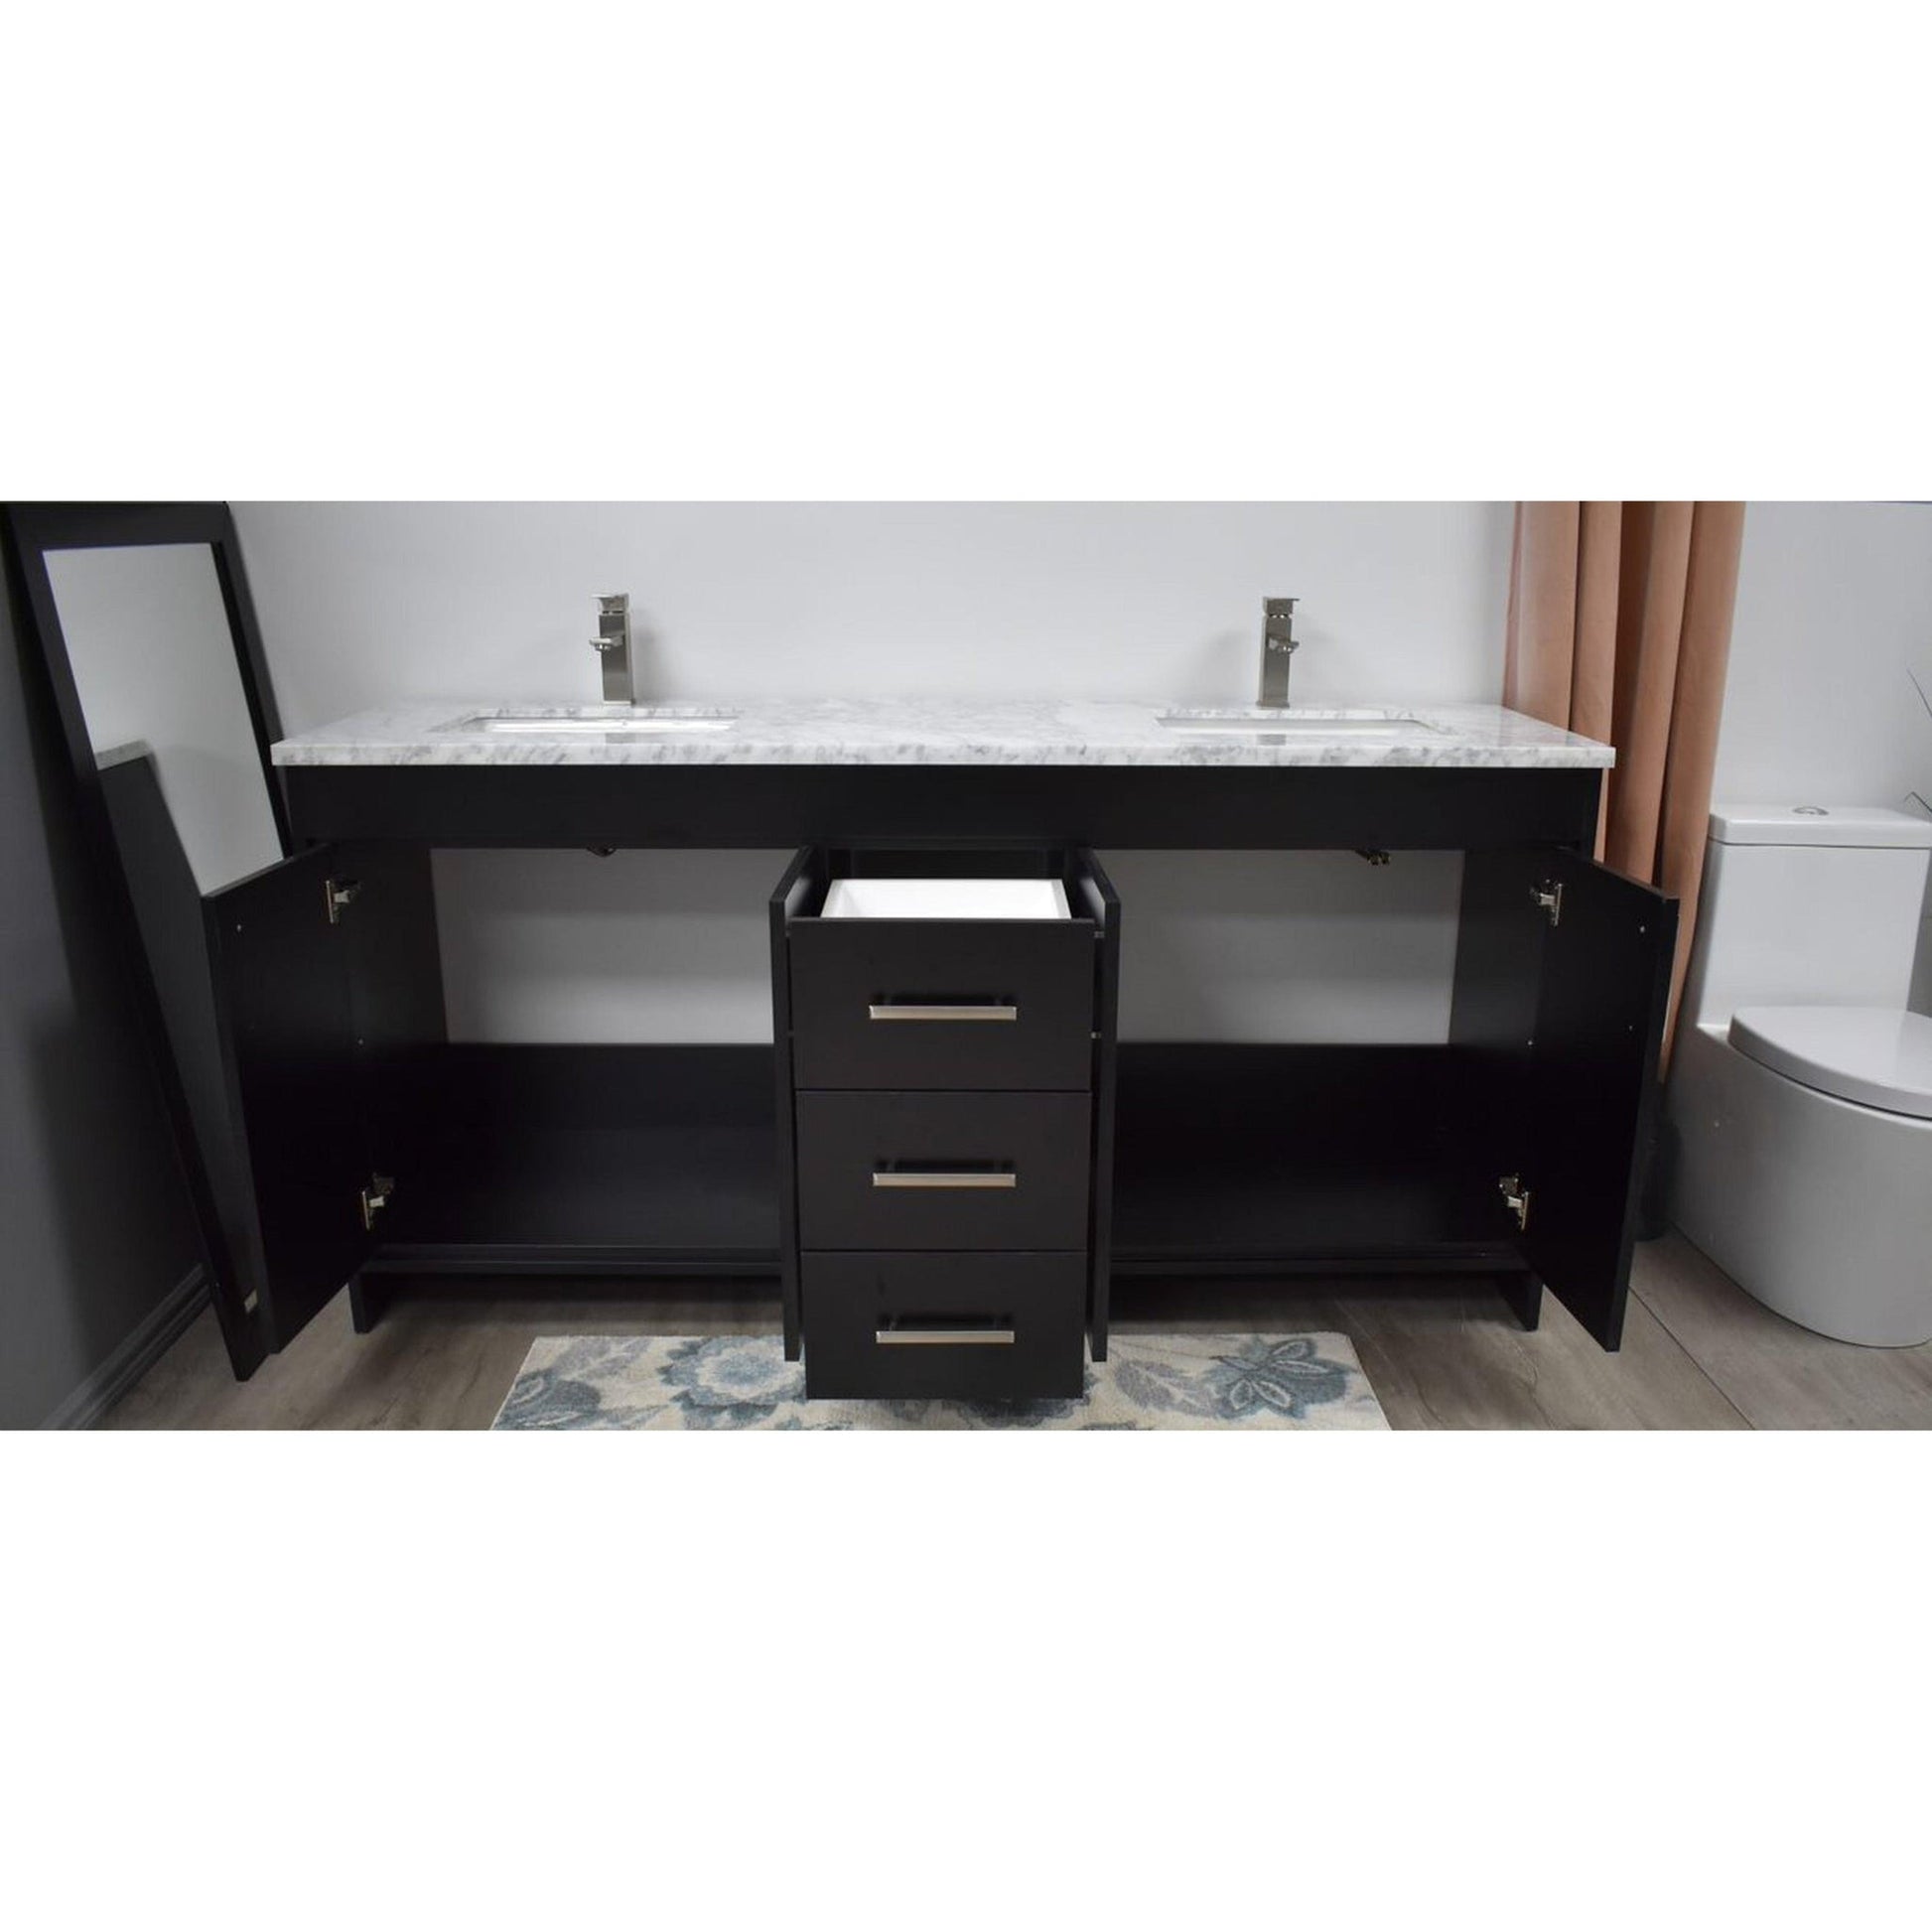 Volpa USA Capri 60" x 22" Black Freestanding Modern Bathroom Vanity With Undermount Double Sink And Carrara Marble Top With Brushed Nickel Edge Handles